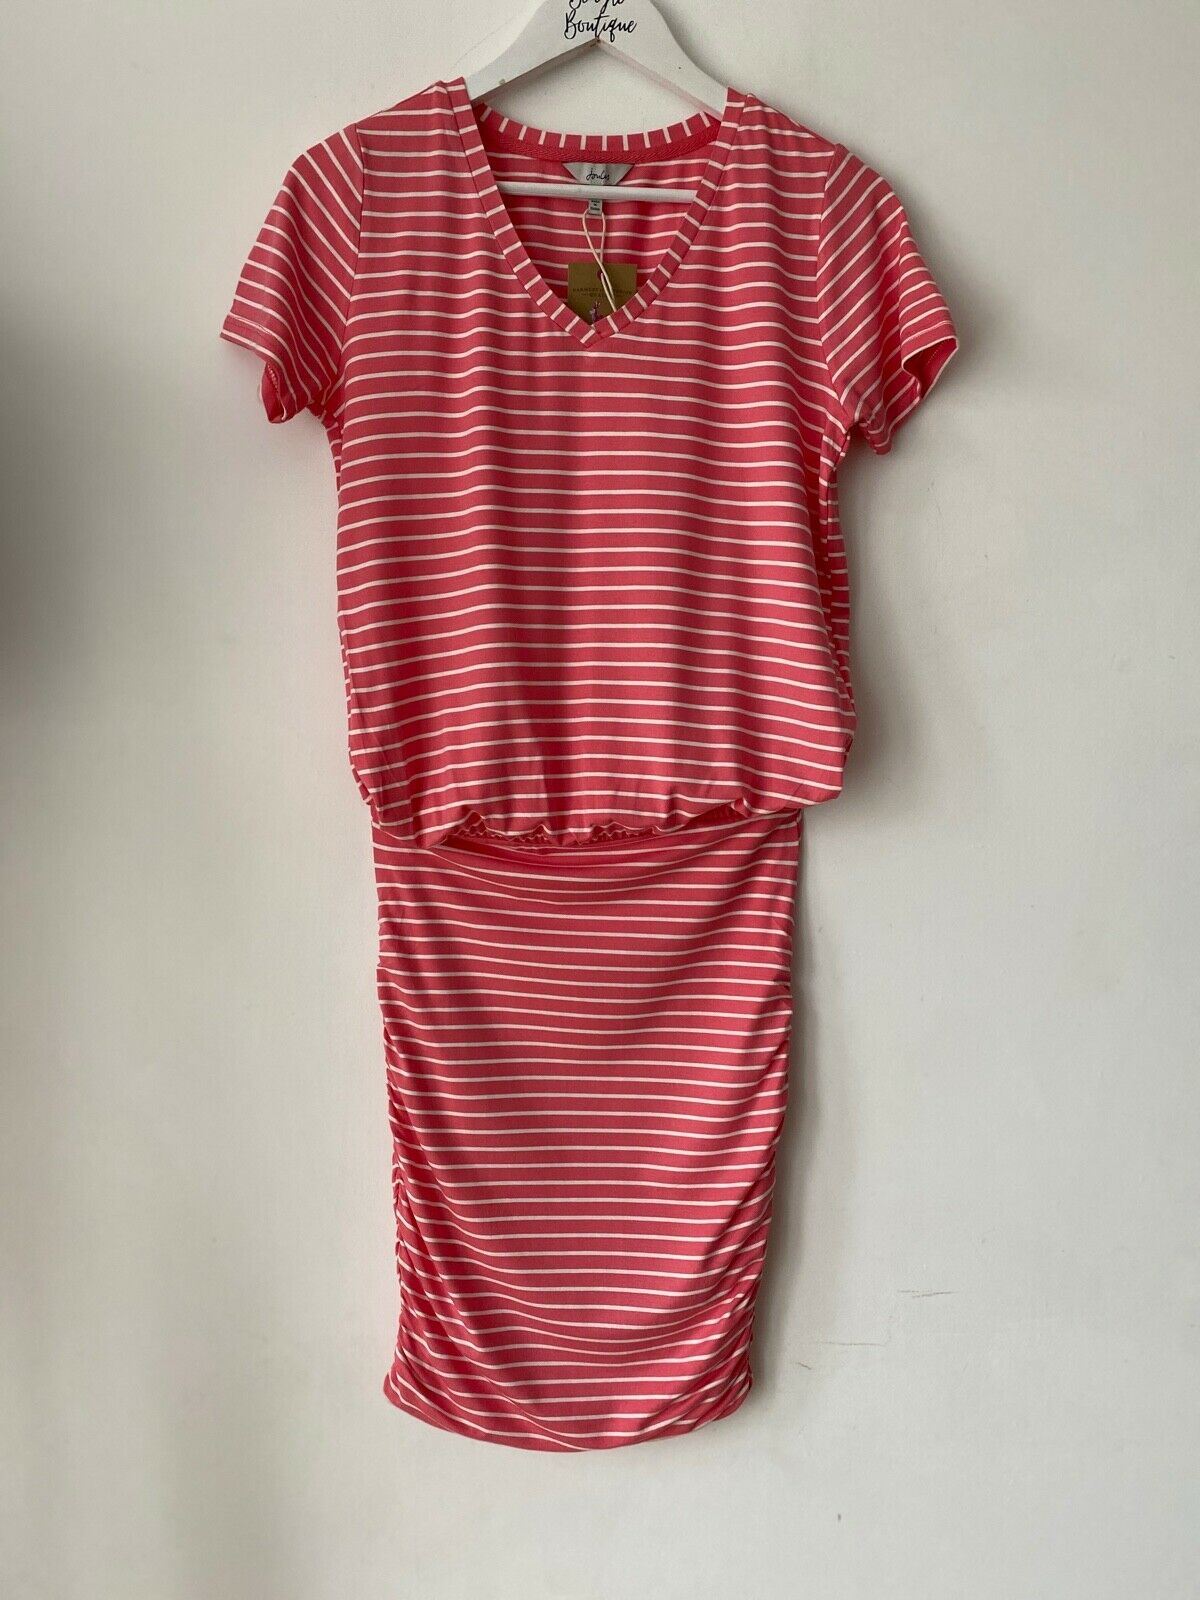 Joules Candice Cotton Striped Dress With Gathered Skirt Navy or Pink Sizes: 6 18